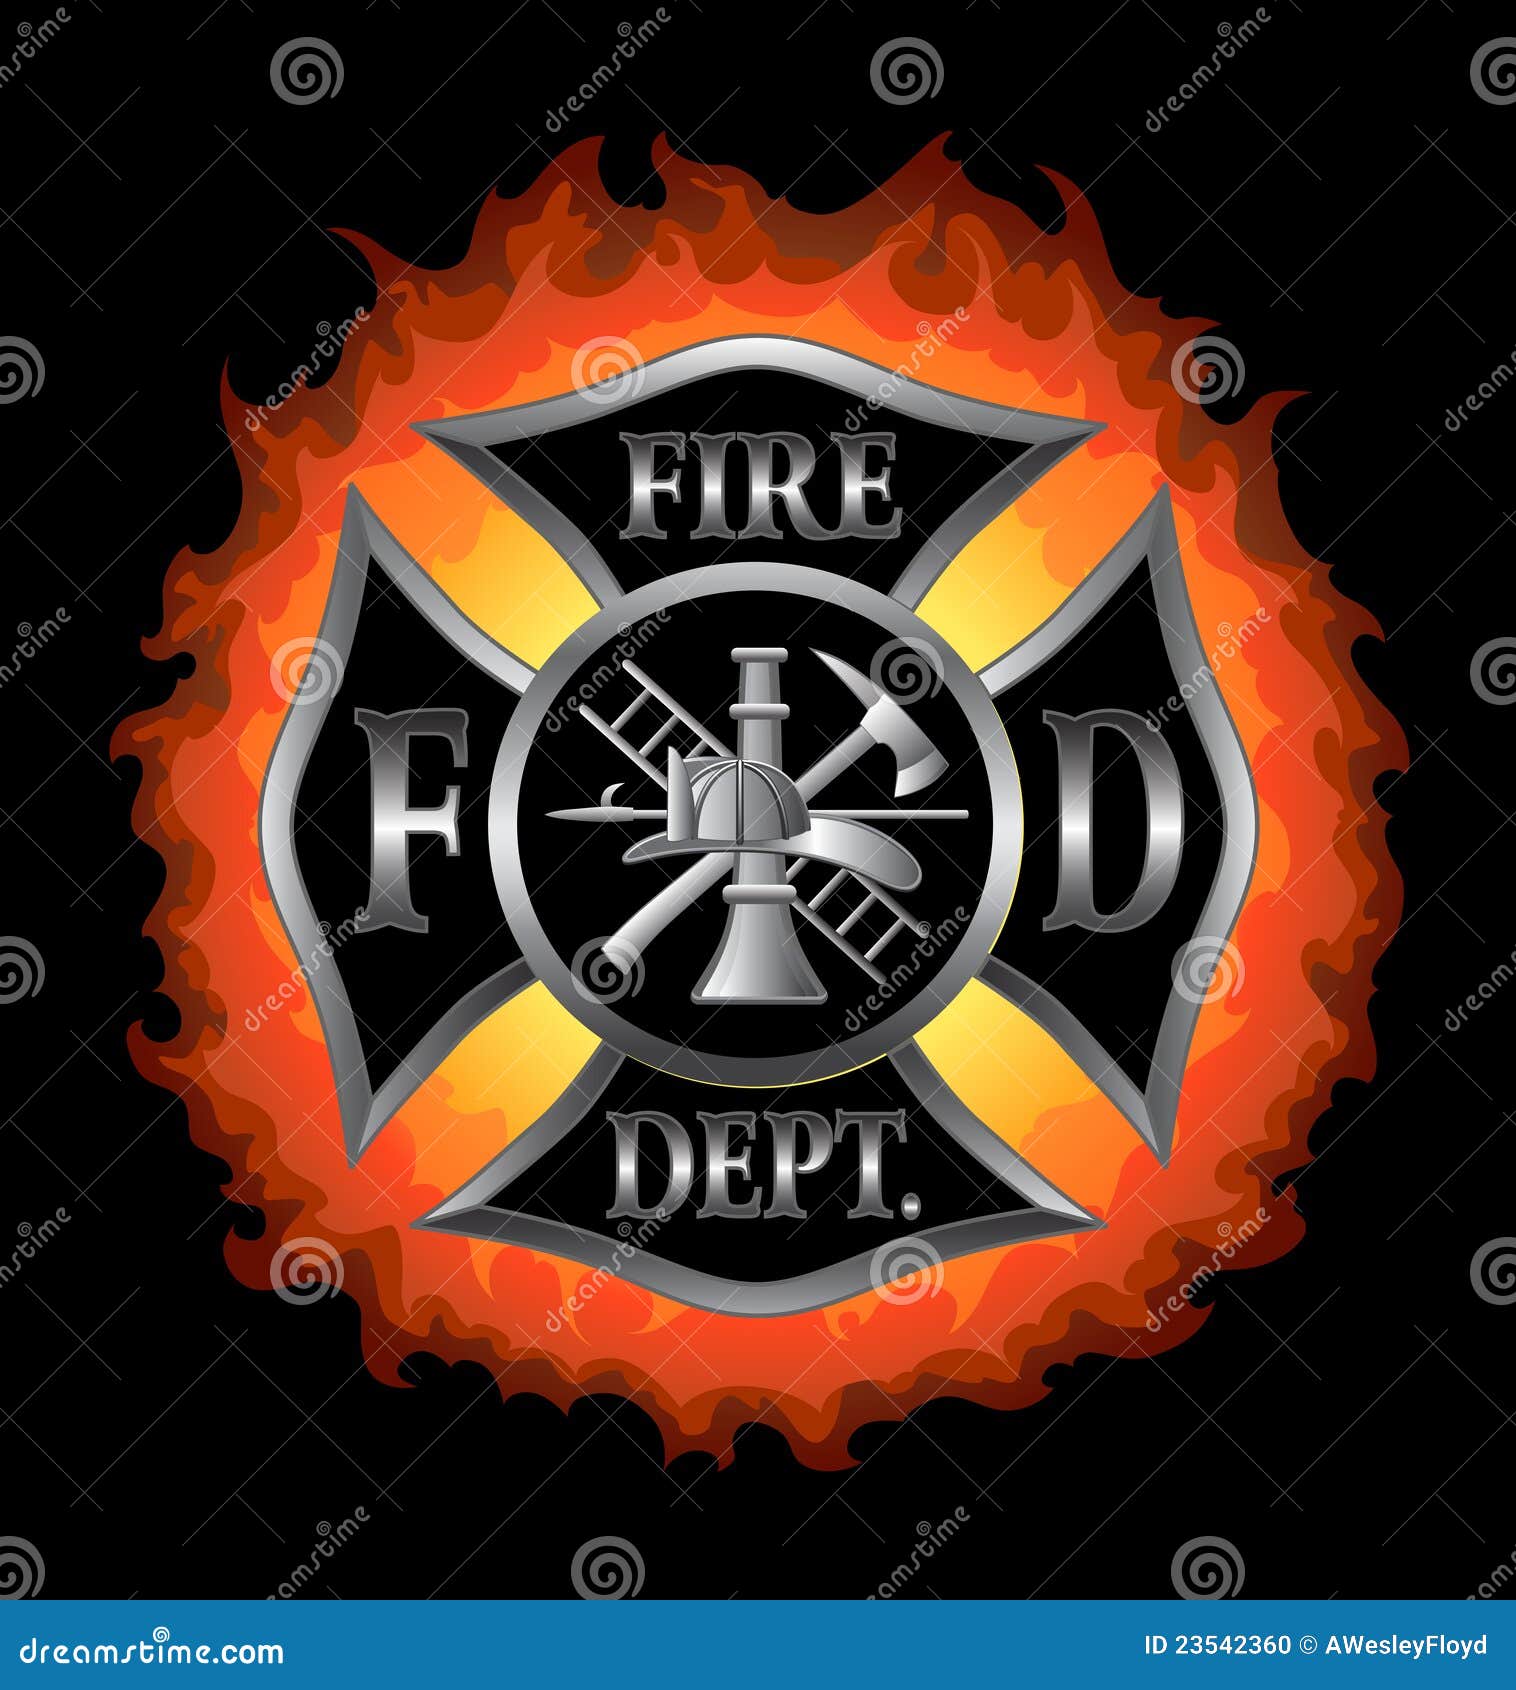 fire department maltese cross with flames